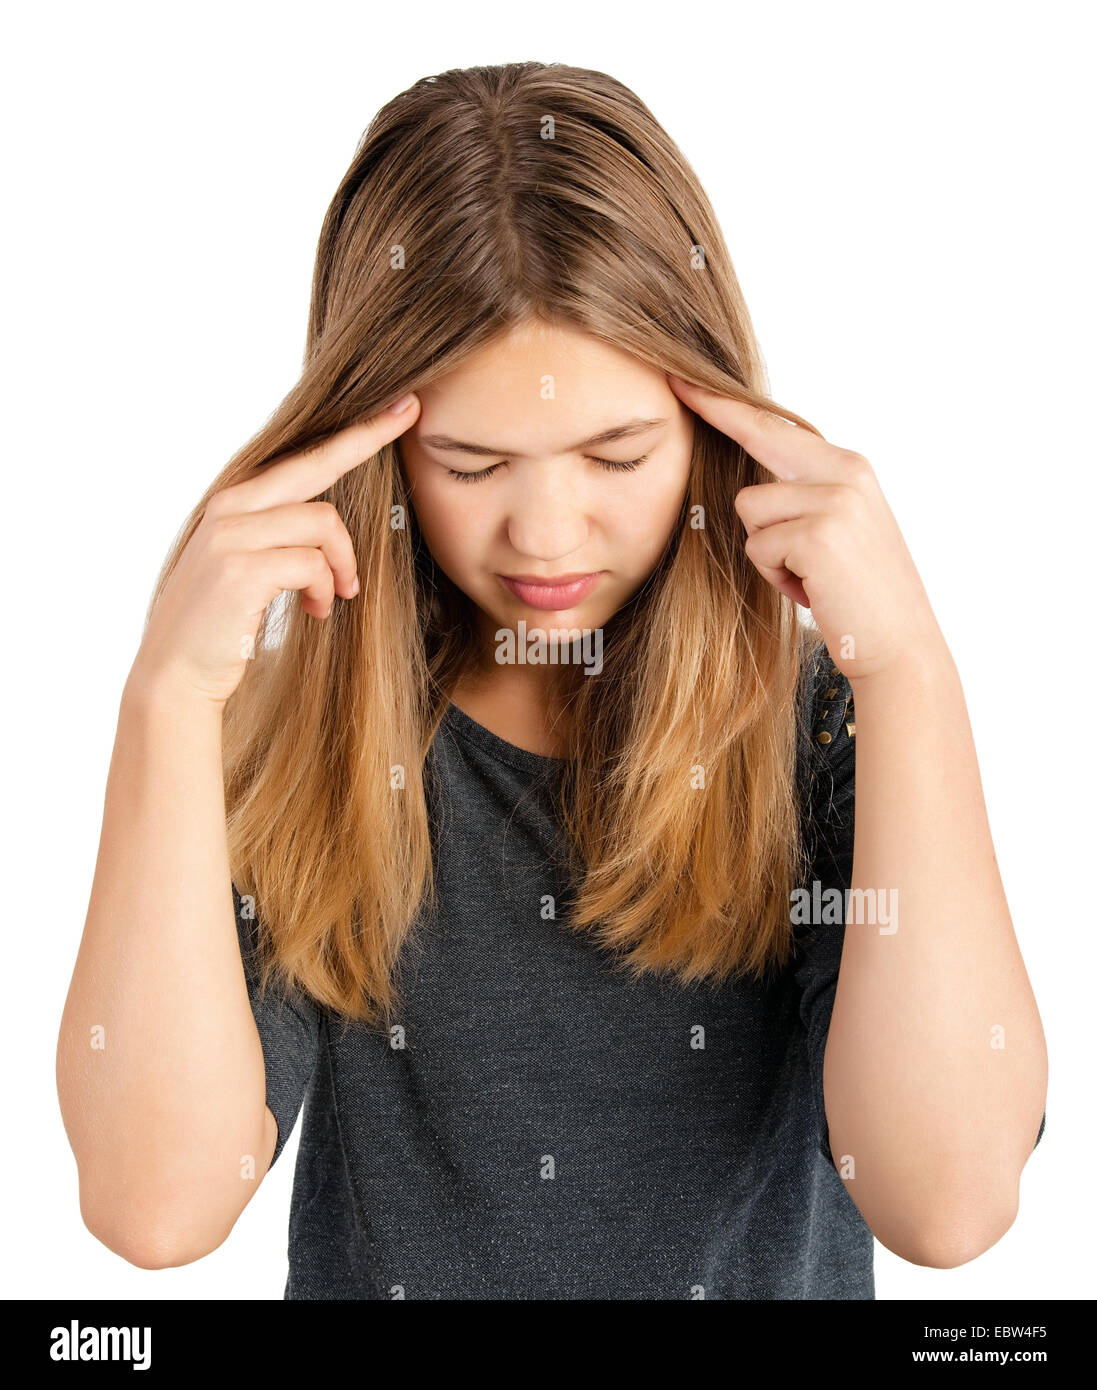 portrait of a girl with headache Stock Photo